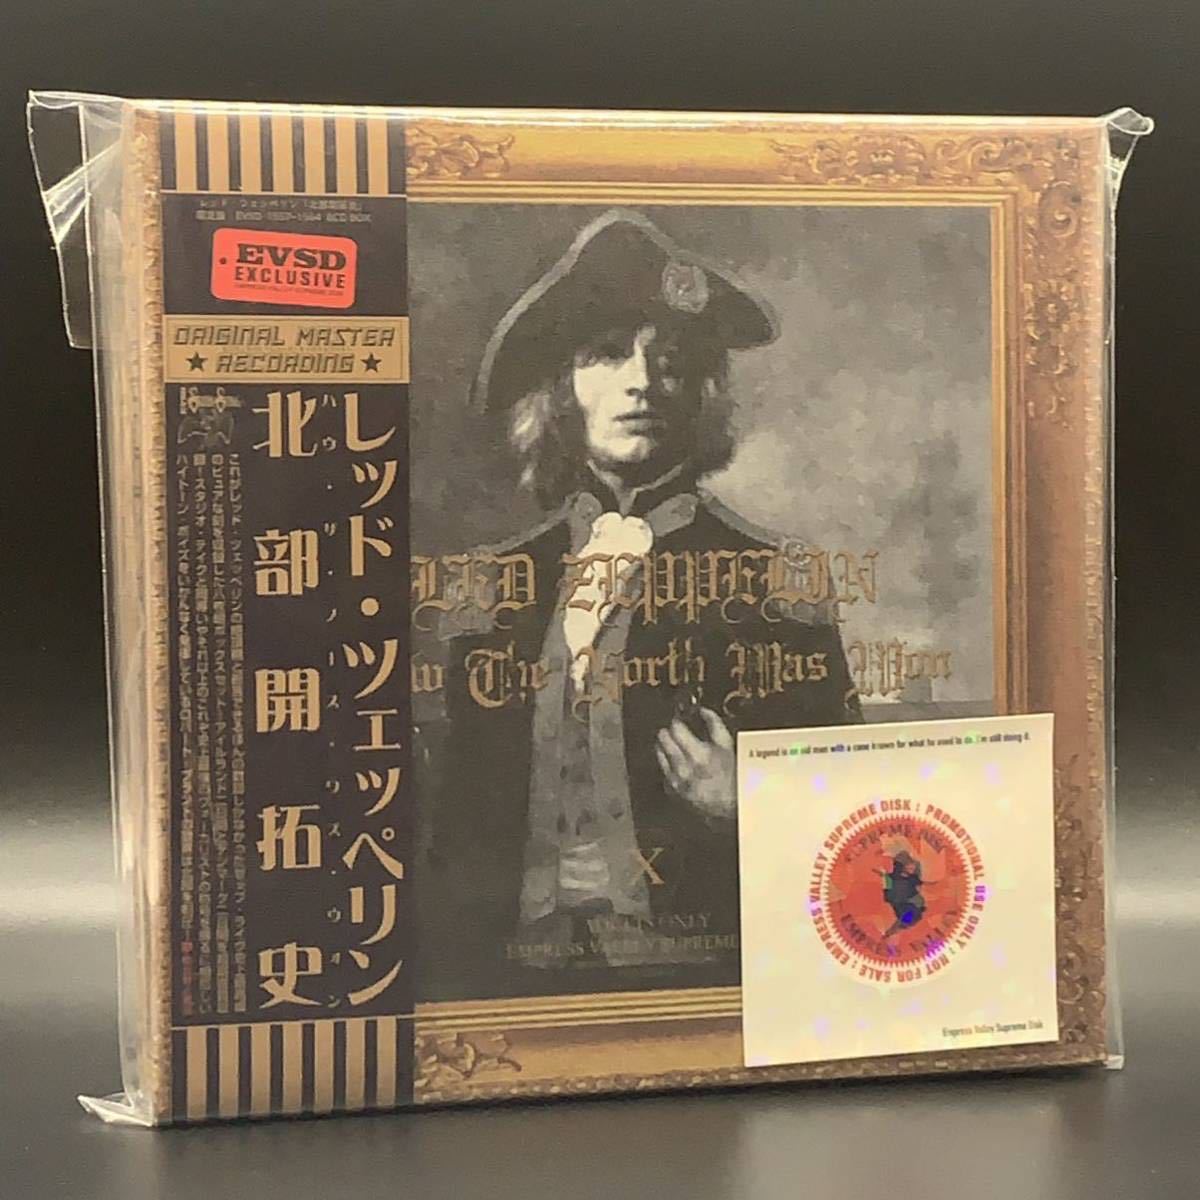 LED ZEPPELIN : HOW THE NORTH WAS WON「北部開拓史」9CD BOX with Booklet EMPRESS VALLEY SUPREME DISK 100 Set Numbered! 完売品！の画像1